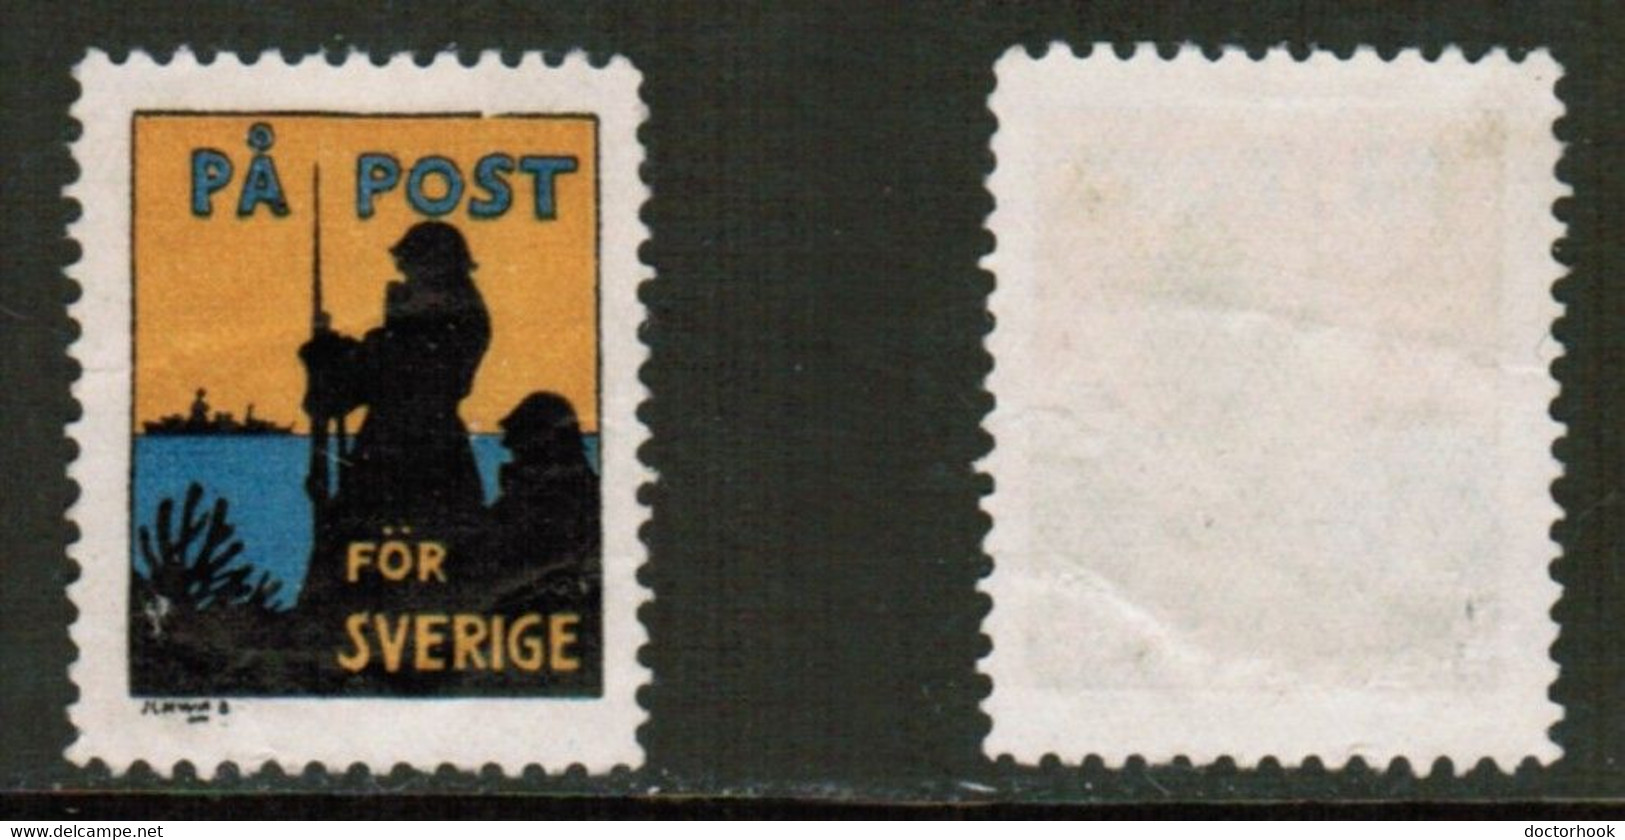 SWEDEN   UNLISTED MILITARY STAMP UNUSED (CONDITION AS PER SCAN) (Stamp Scan # 839-7) - Militares